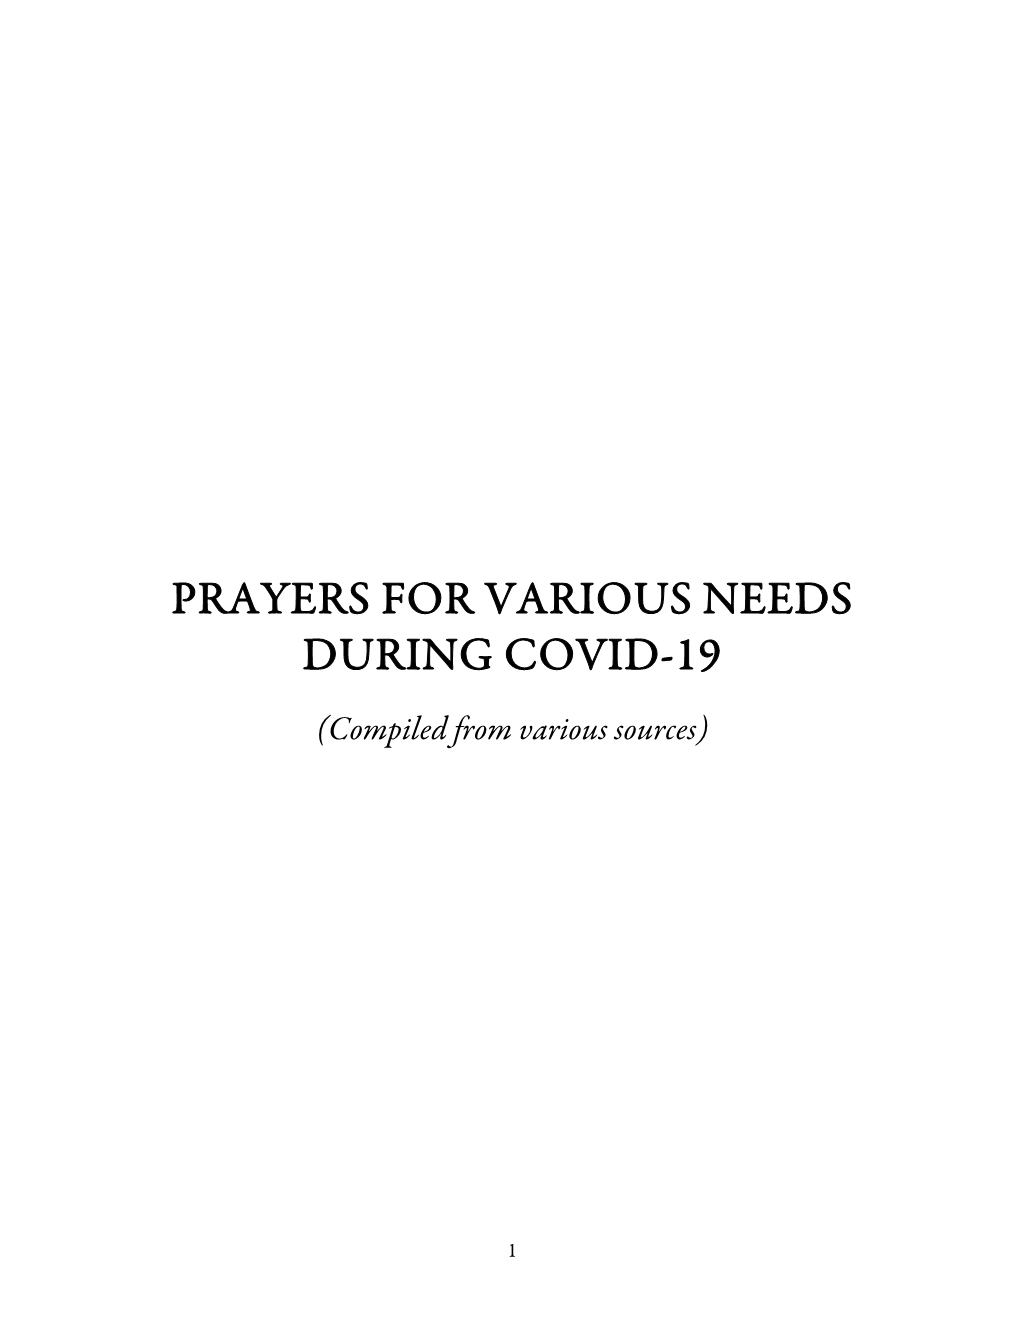 Prayers for Various Needs During Covid-19